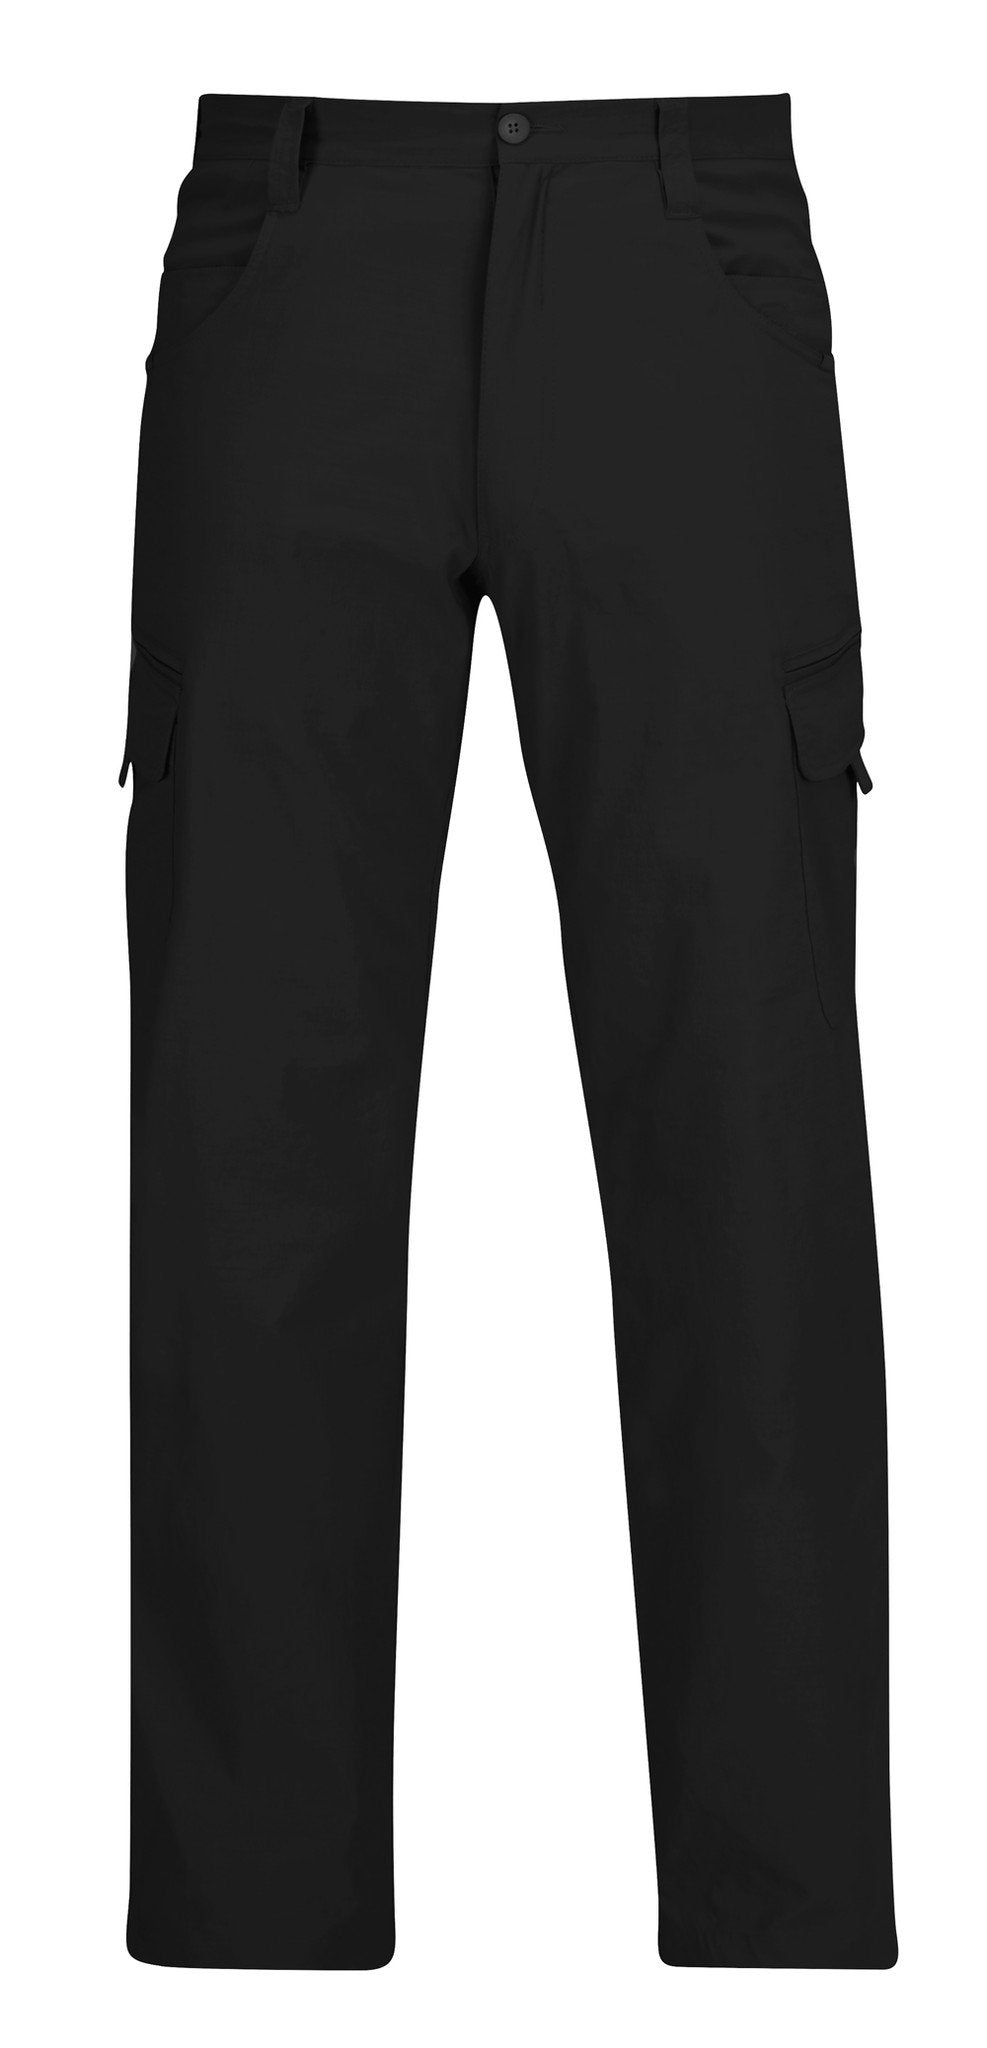 Propper Summerweight Tactical Pant - Black - mtrsuperstore